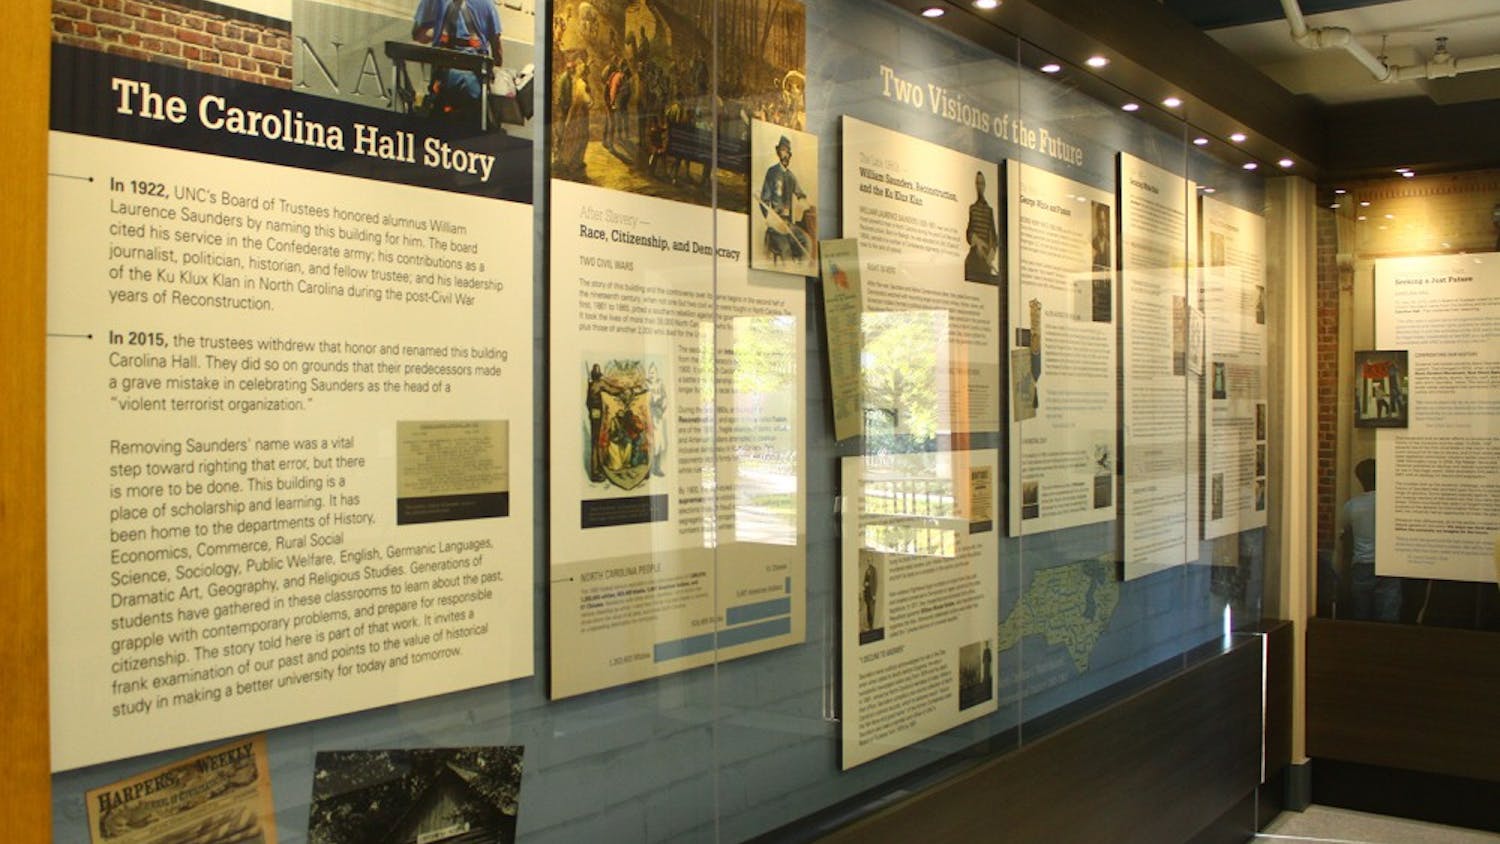 A permanent exhibit in the entrance of Carolina Hall detailing the building's history. The hall was originally named for William Saunders, former leader of the N.C. Klan and UNC Trustee.